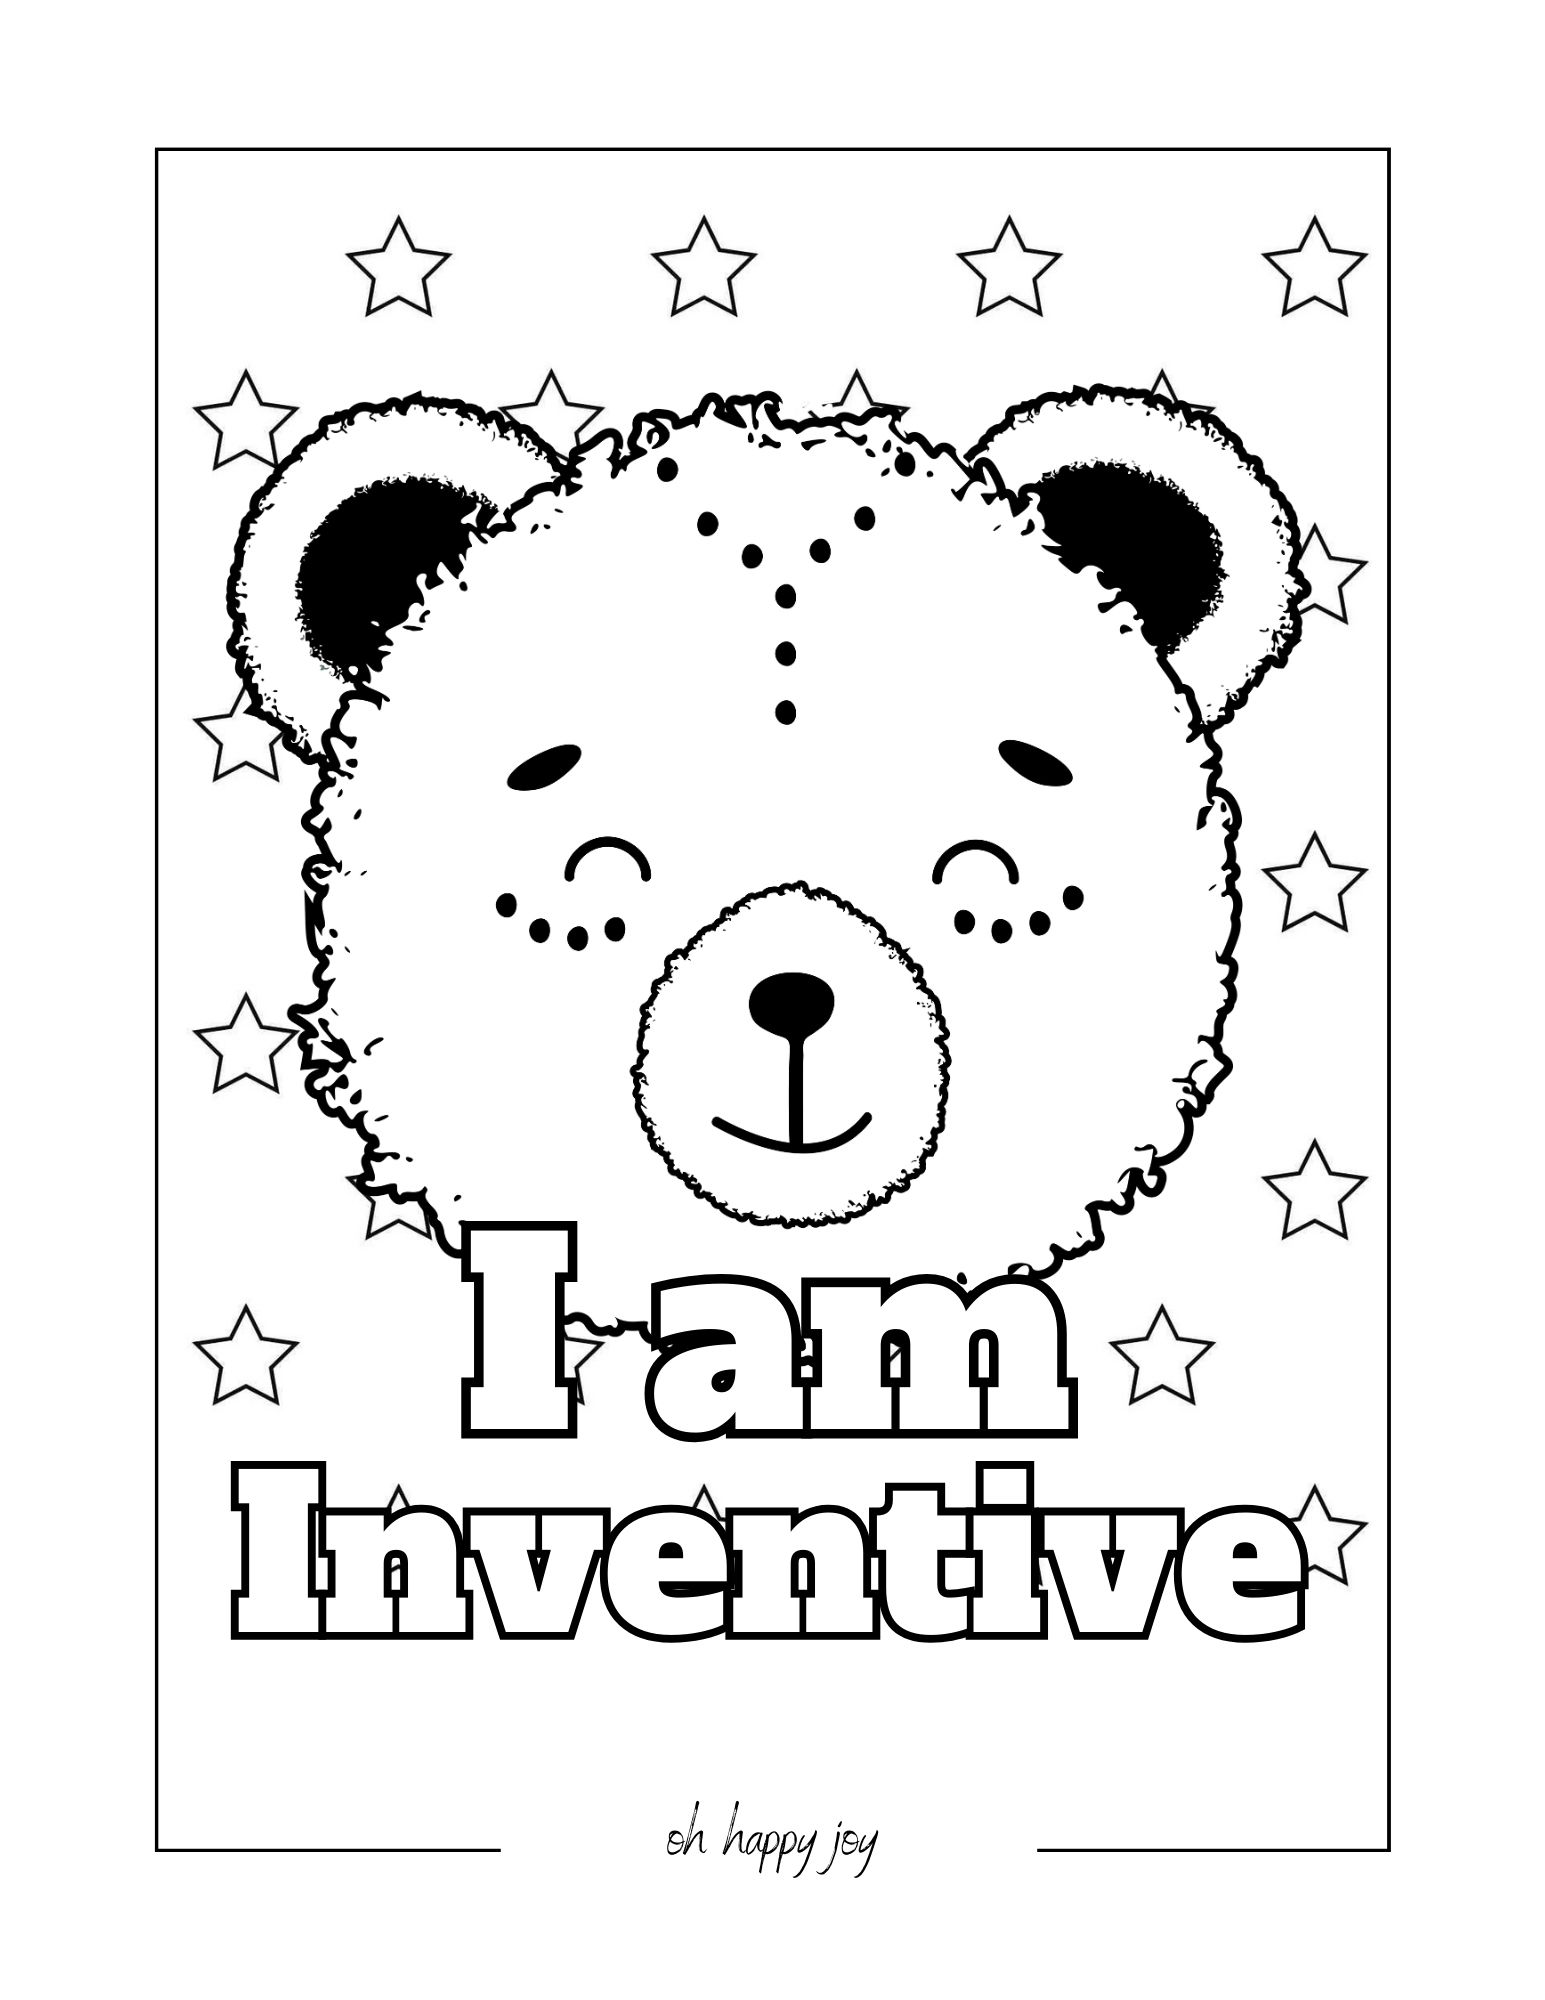 I am inventive affirmation coloring page